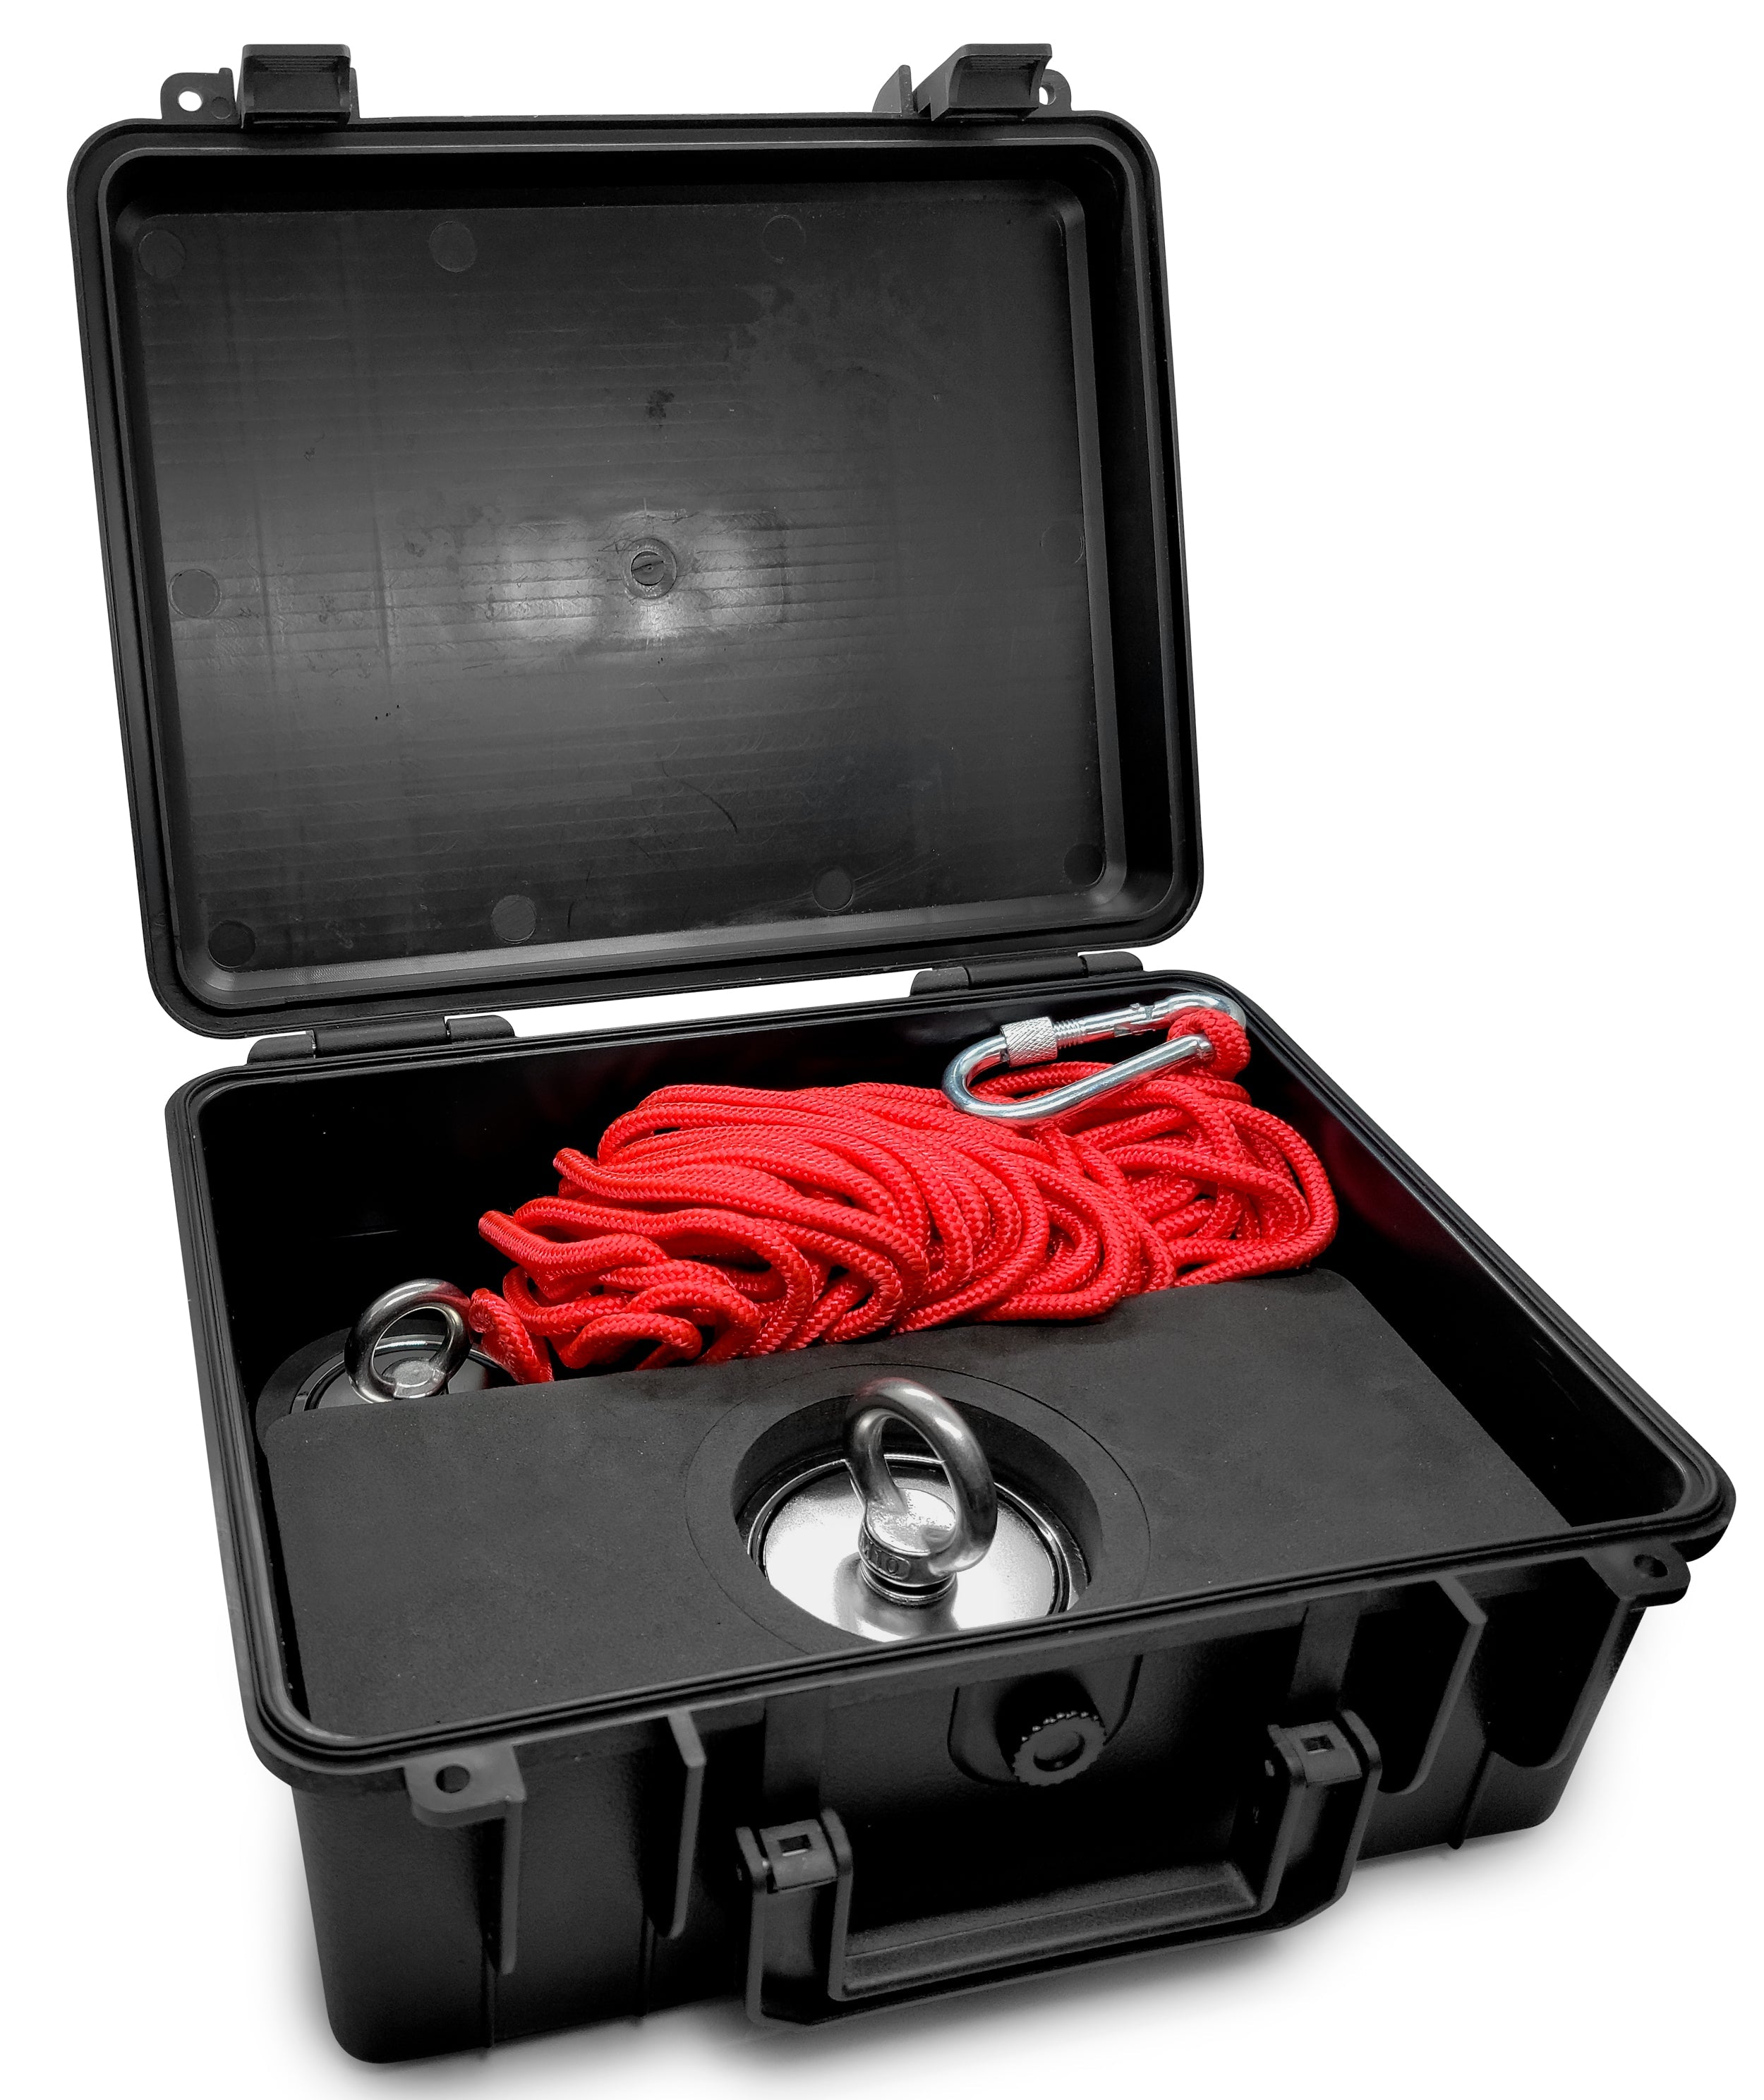 Magnet Fishing Kit with Case Fishing Magnets 1000 LBS Pulling Force